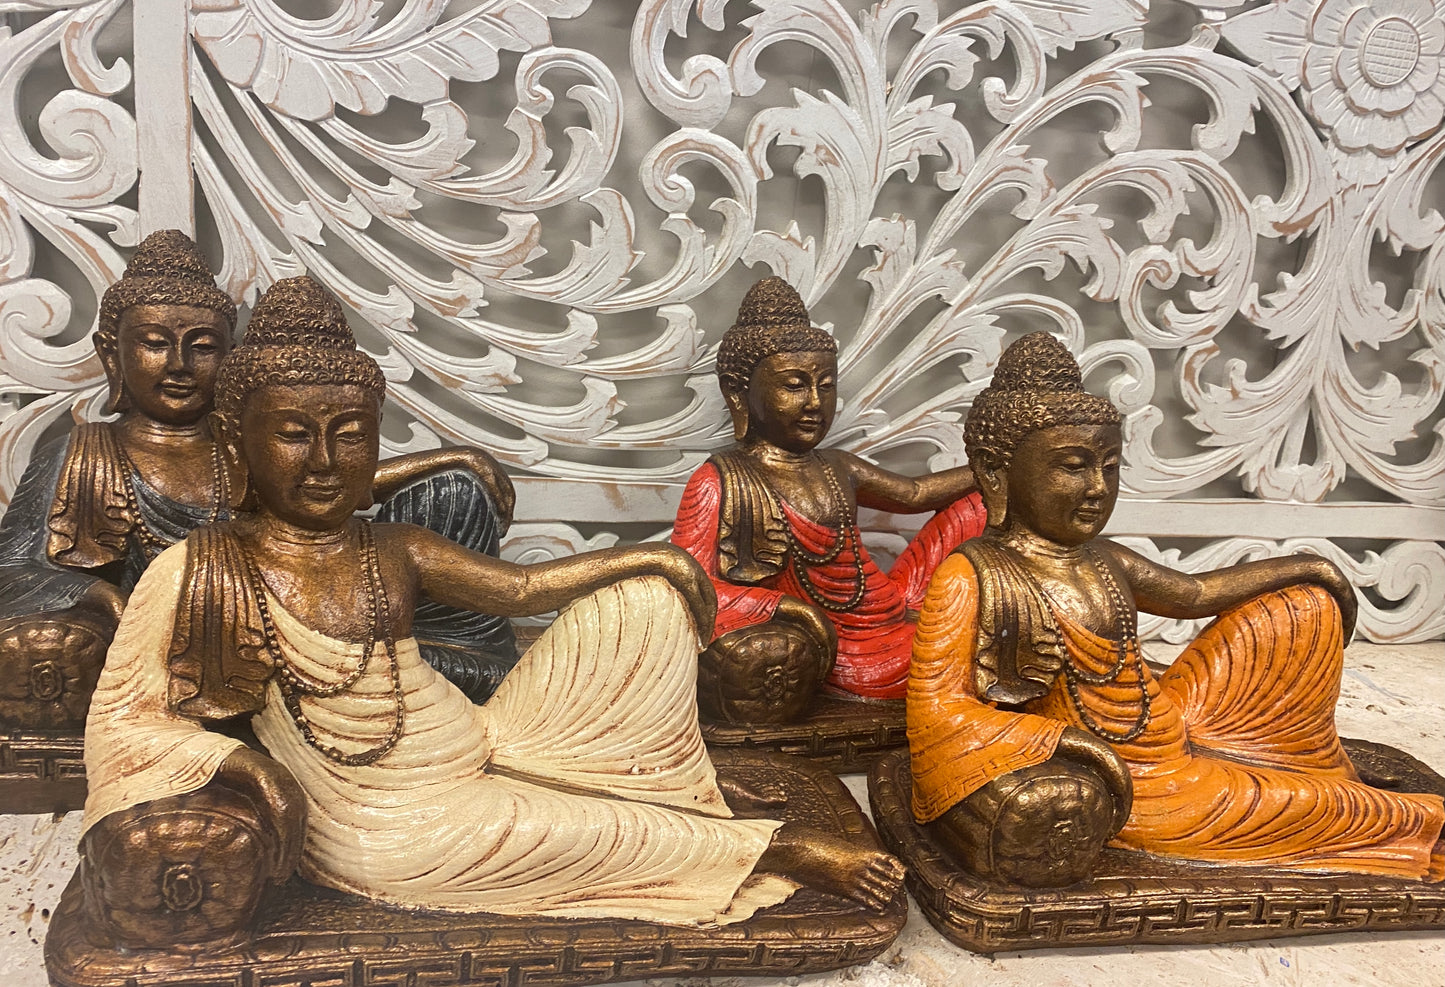 XL Resin Reclining Buddha Statues - Available in 4 Colors 40cm x 30cm